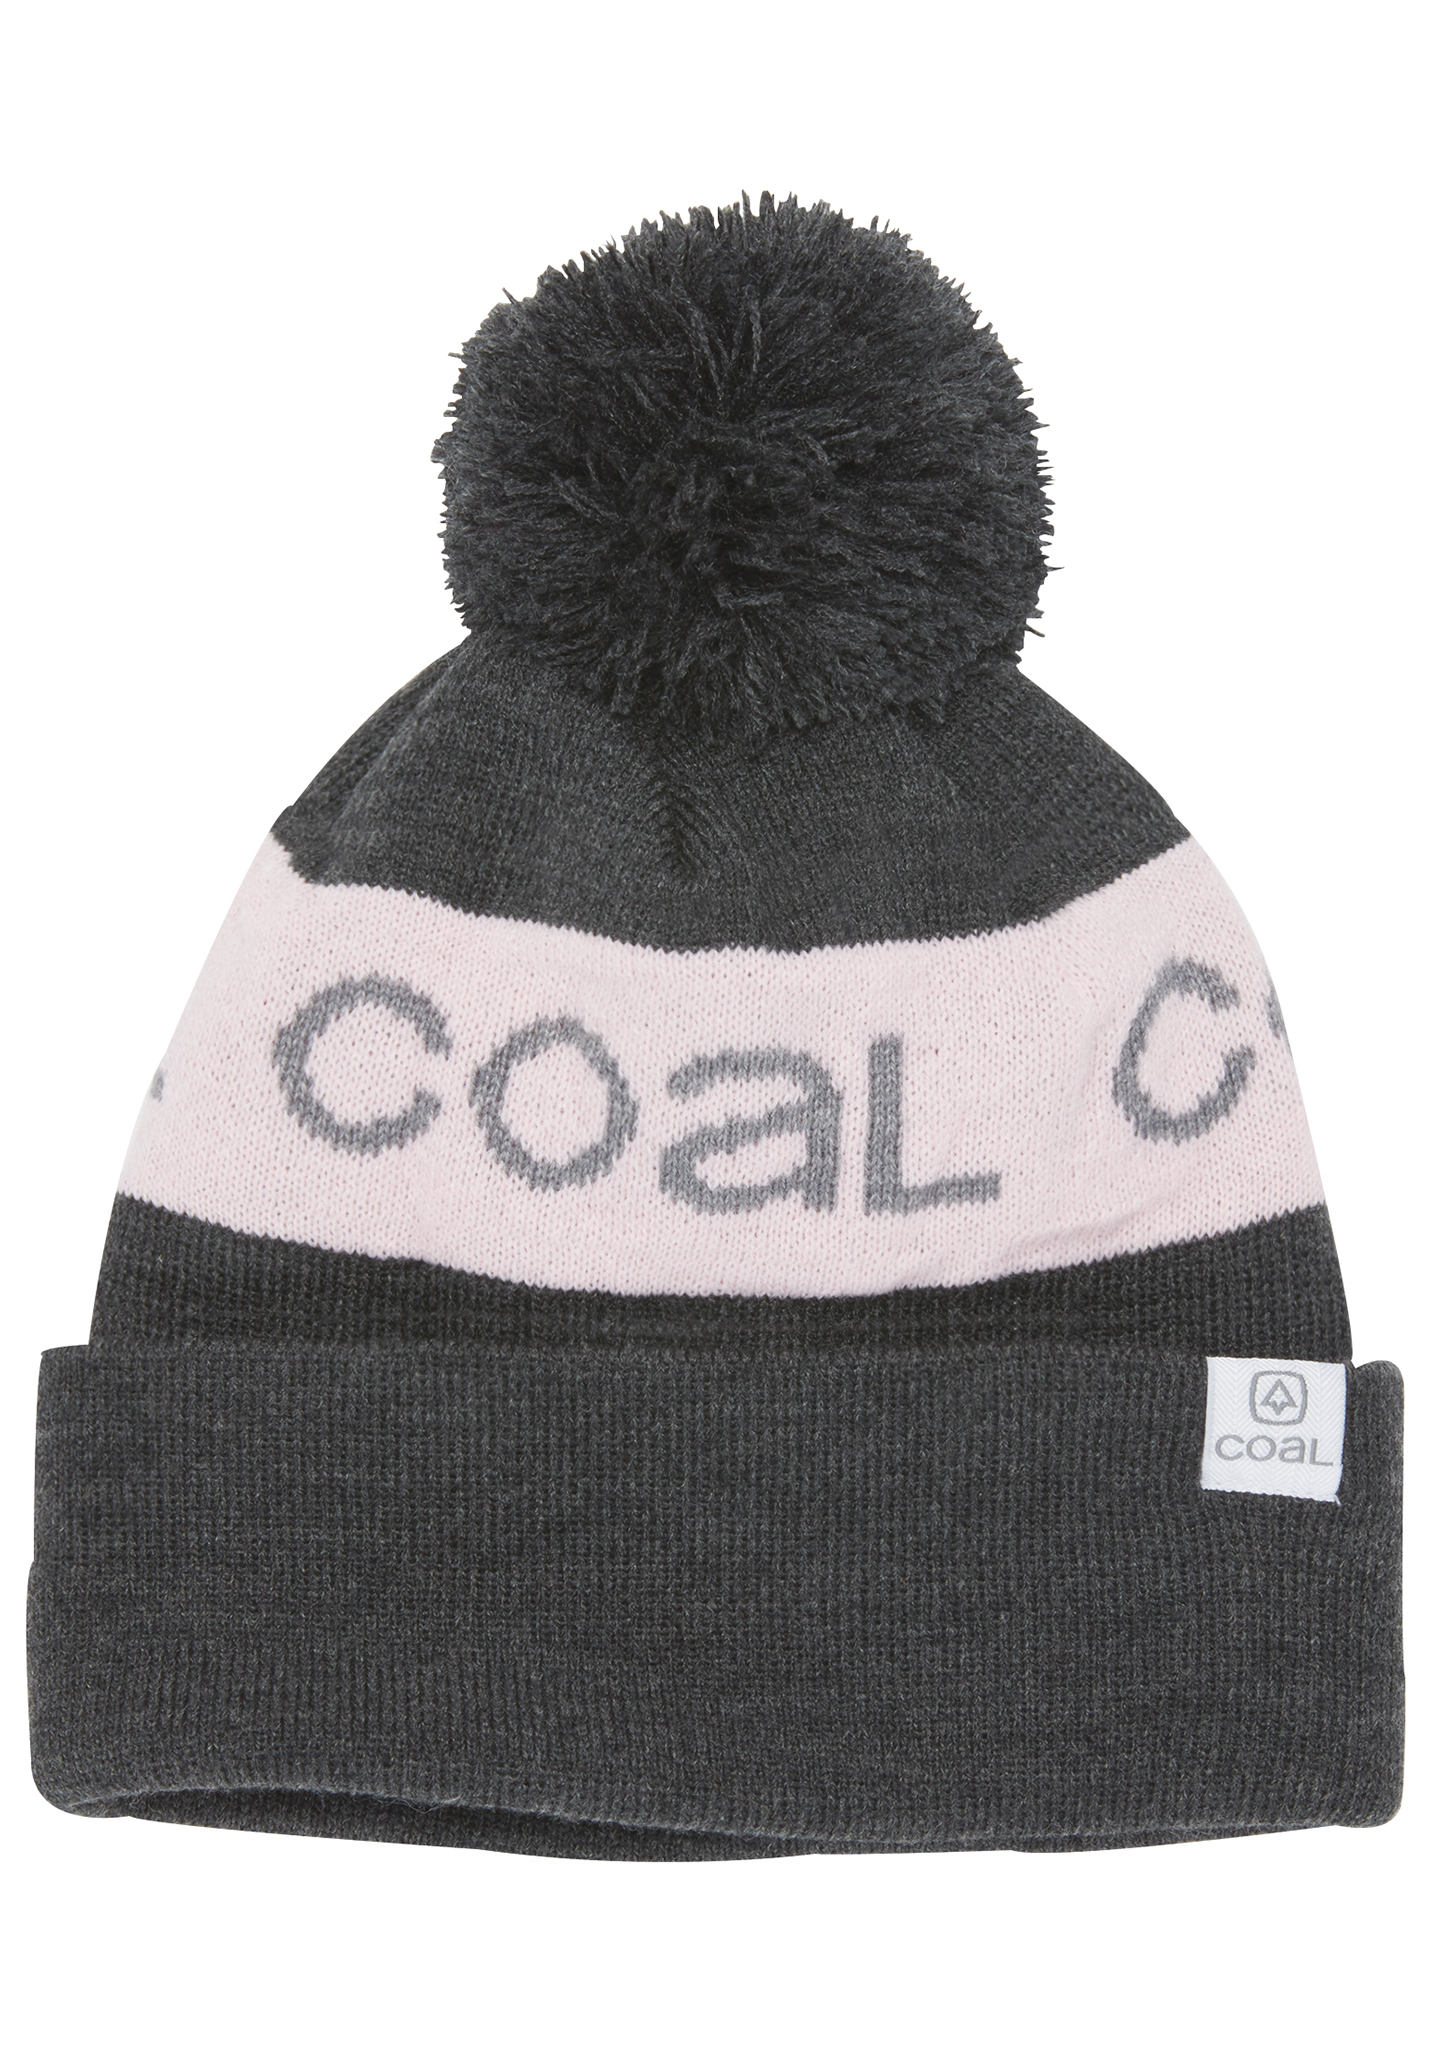 Coal The Team charcoal One Size